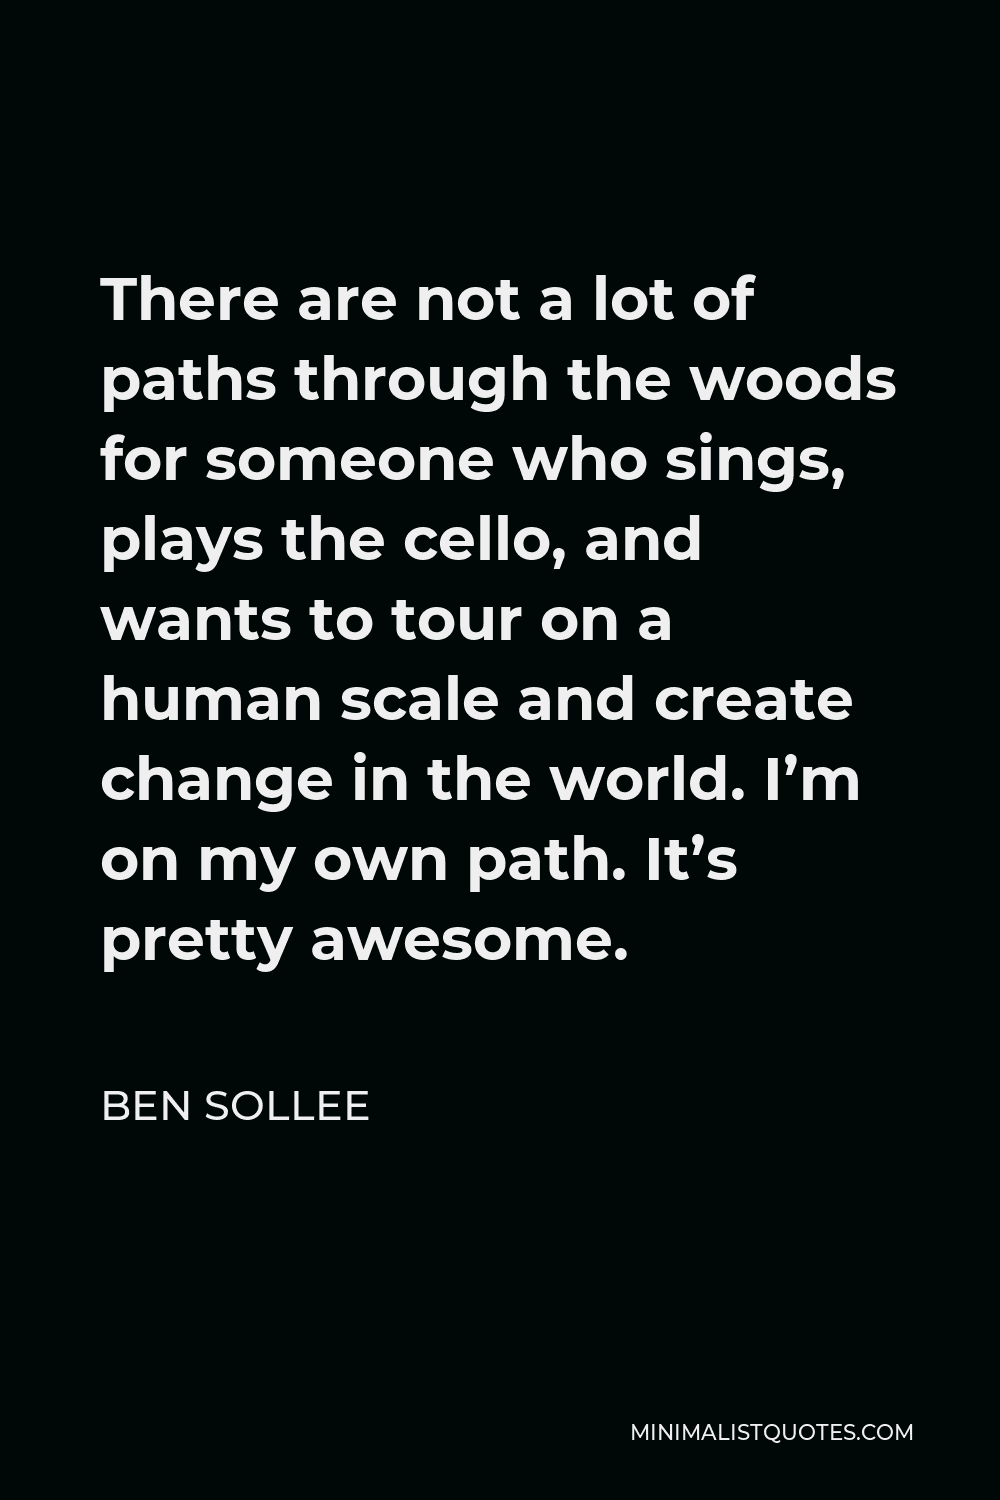 Ben Sollee Quote - There are not a lot of paths through the woods for someone who sings, plays the cello, and wants to tour on a human scale and create change in the world. I’m on my own path. It’s pretty awesome.